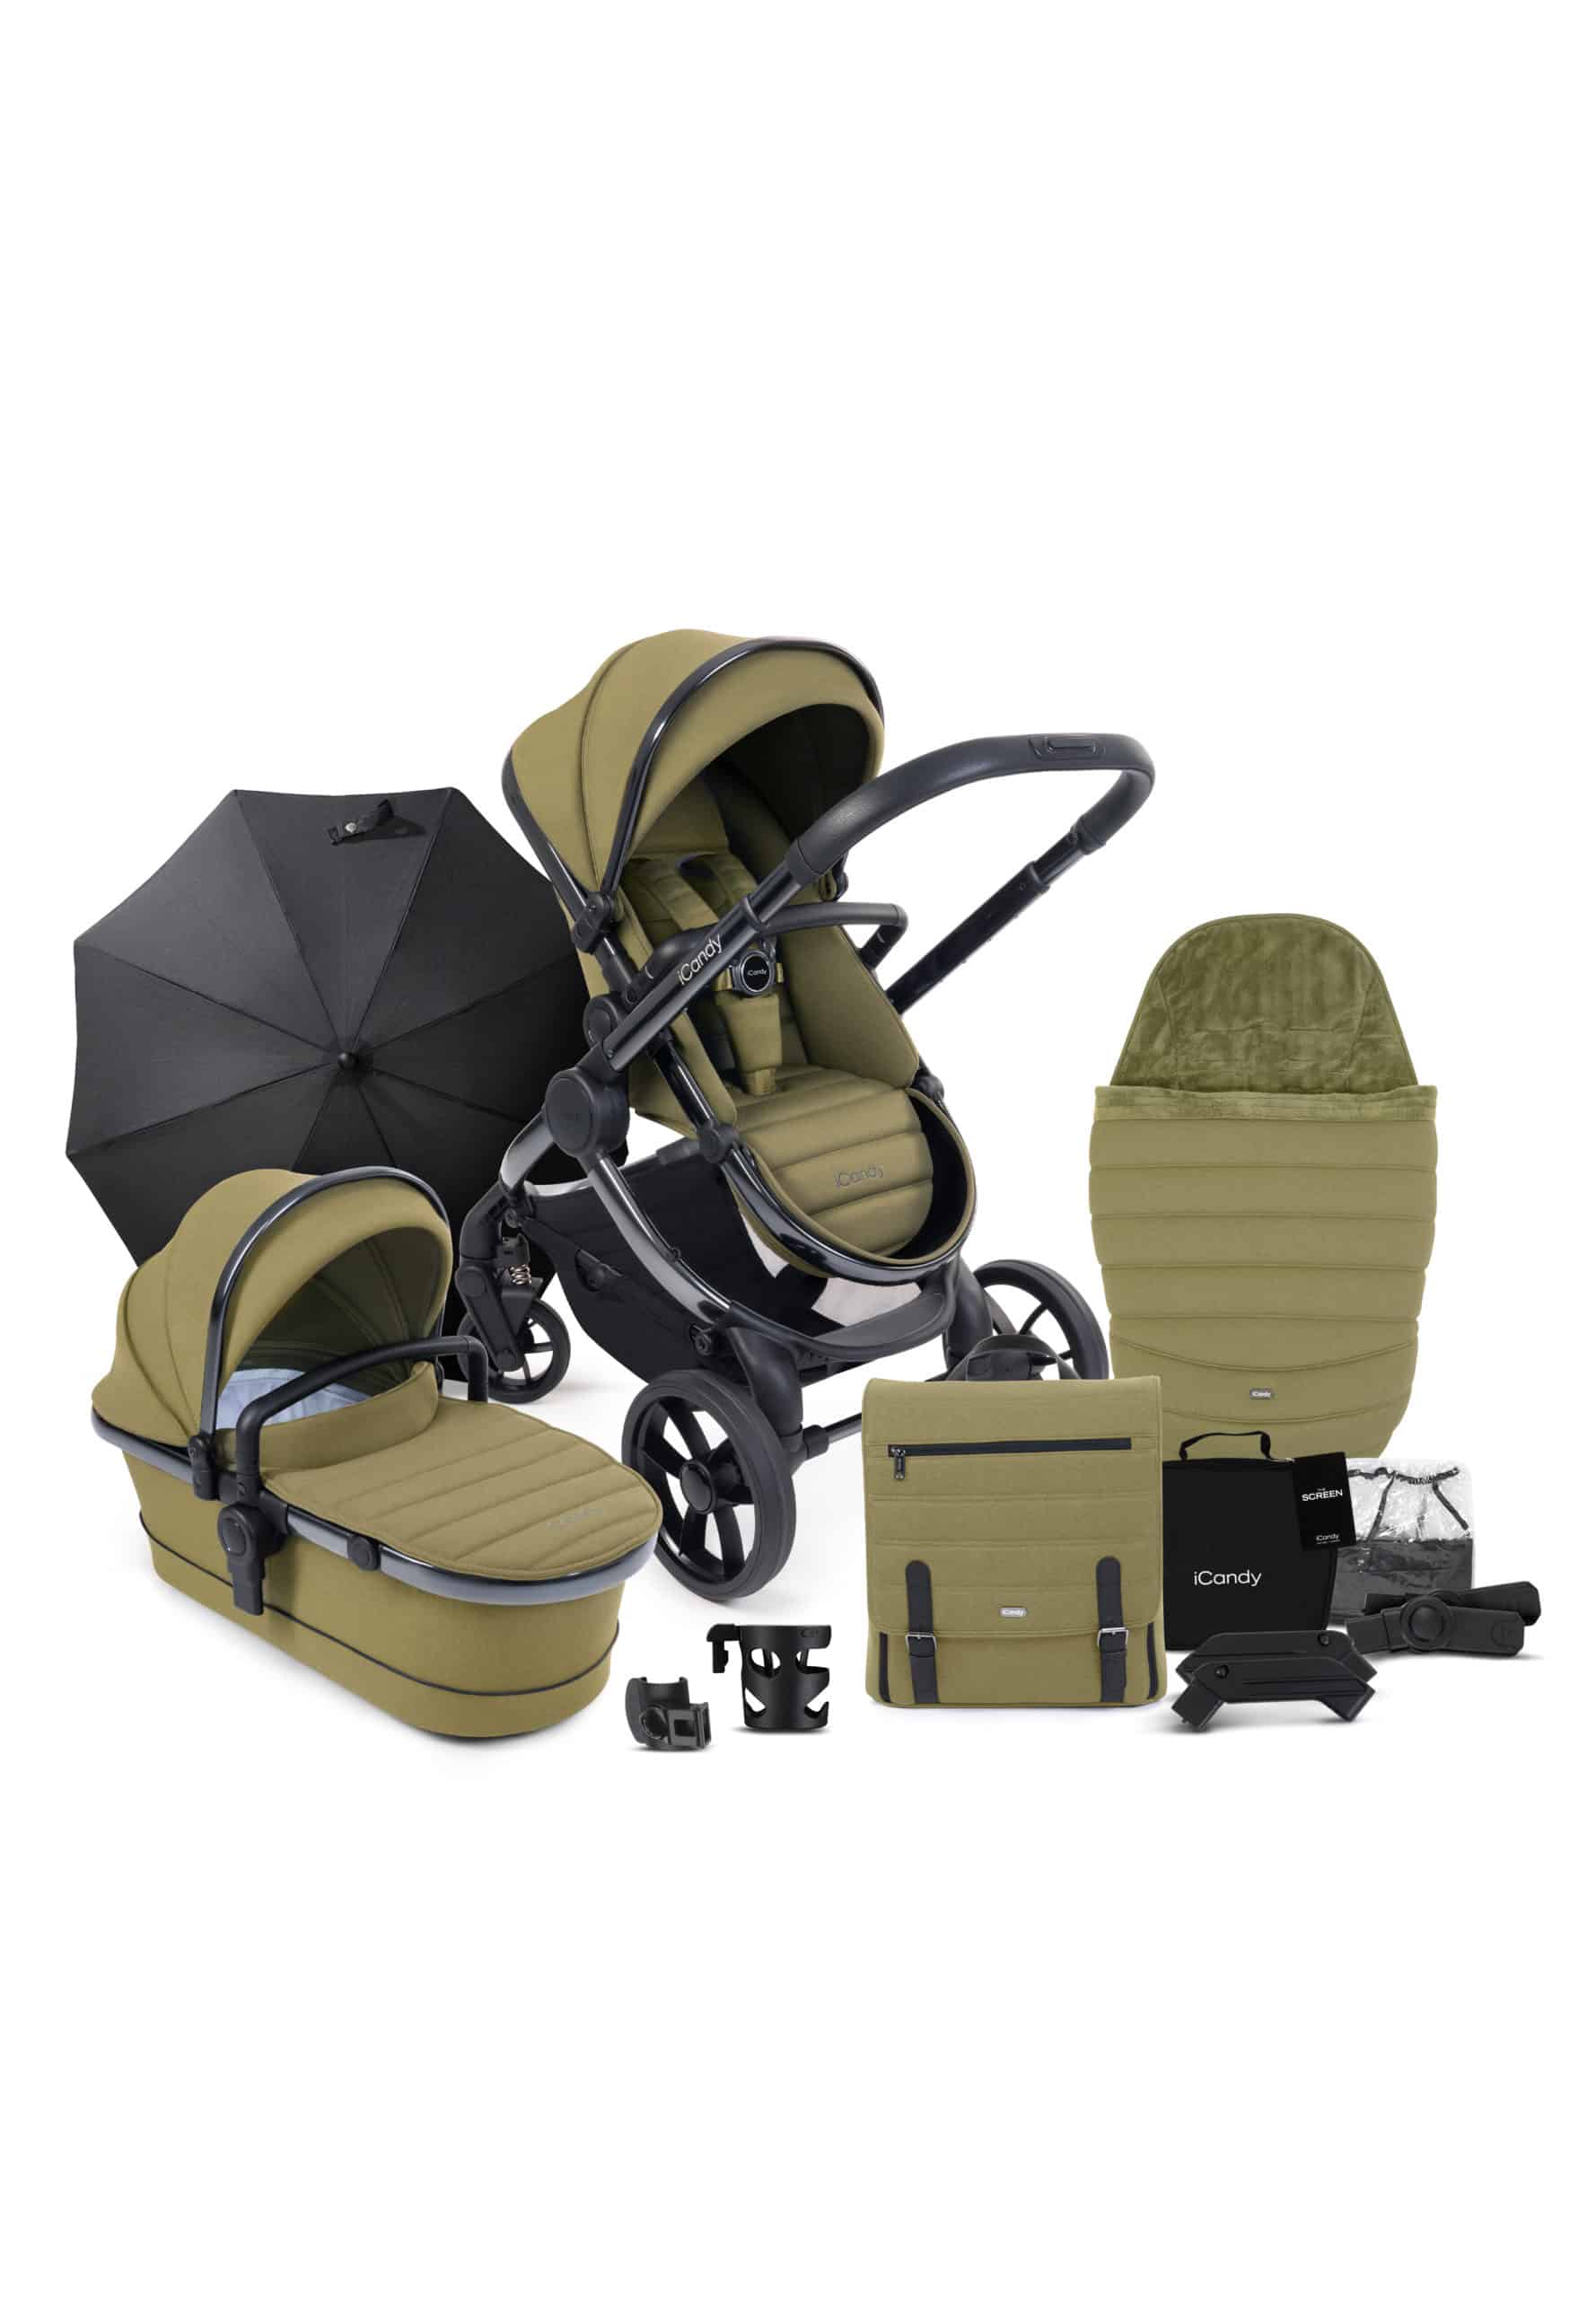 iCandy Peach 7 Pushchair & Carrycot Complete Bundle- Phantom/Olive Green